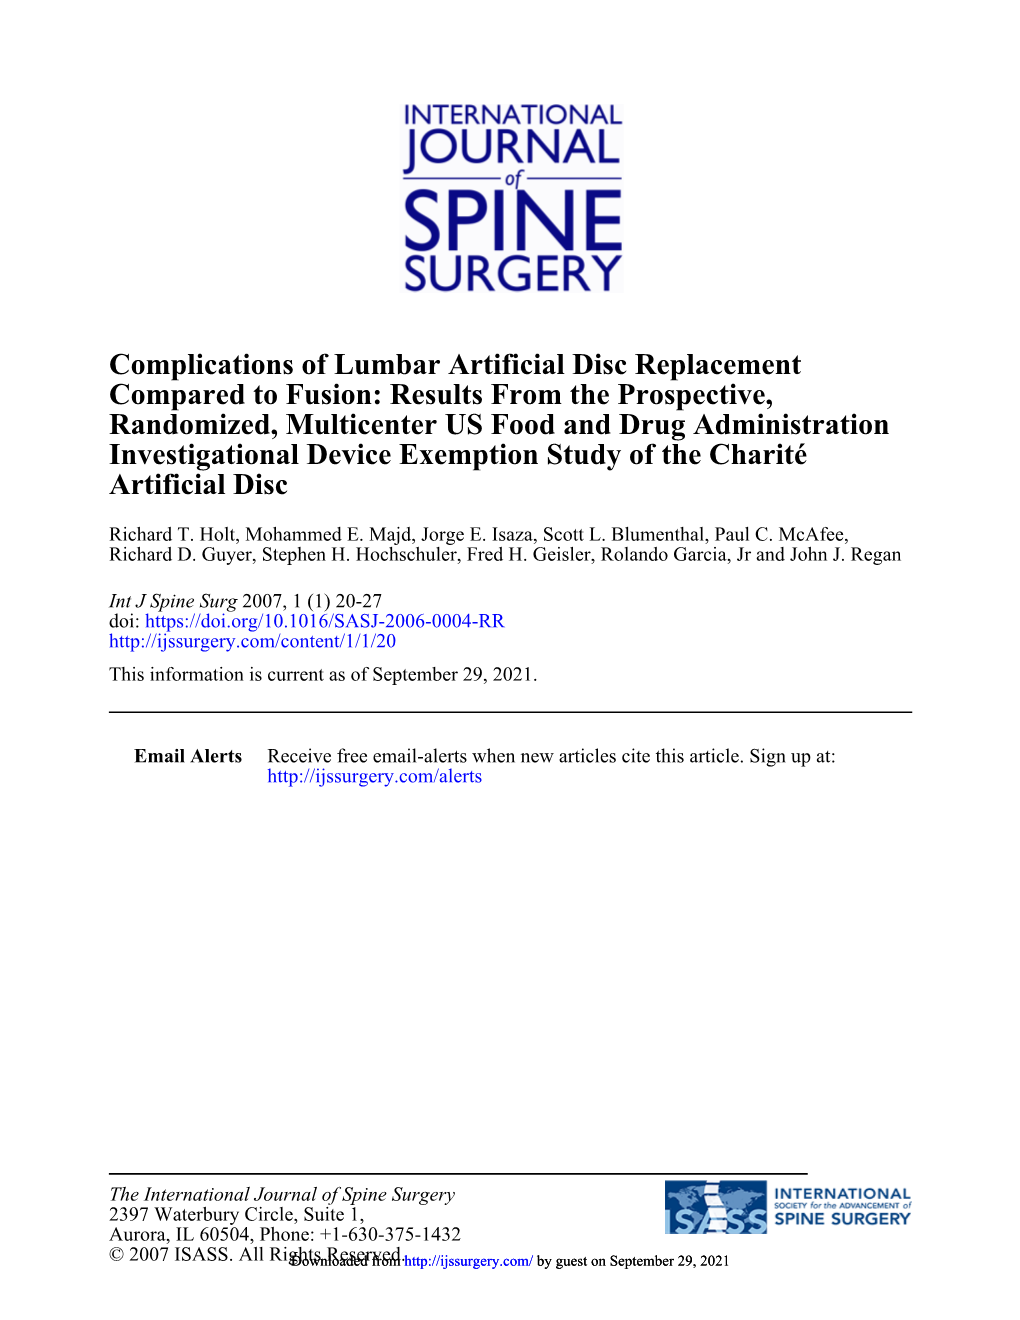 Complications of Lumbar Artificial Disc Replacement Compared to Fusion